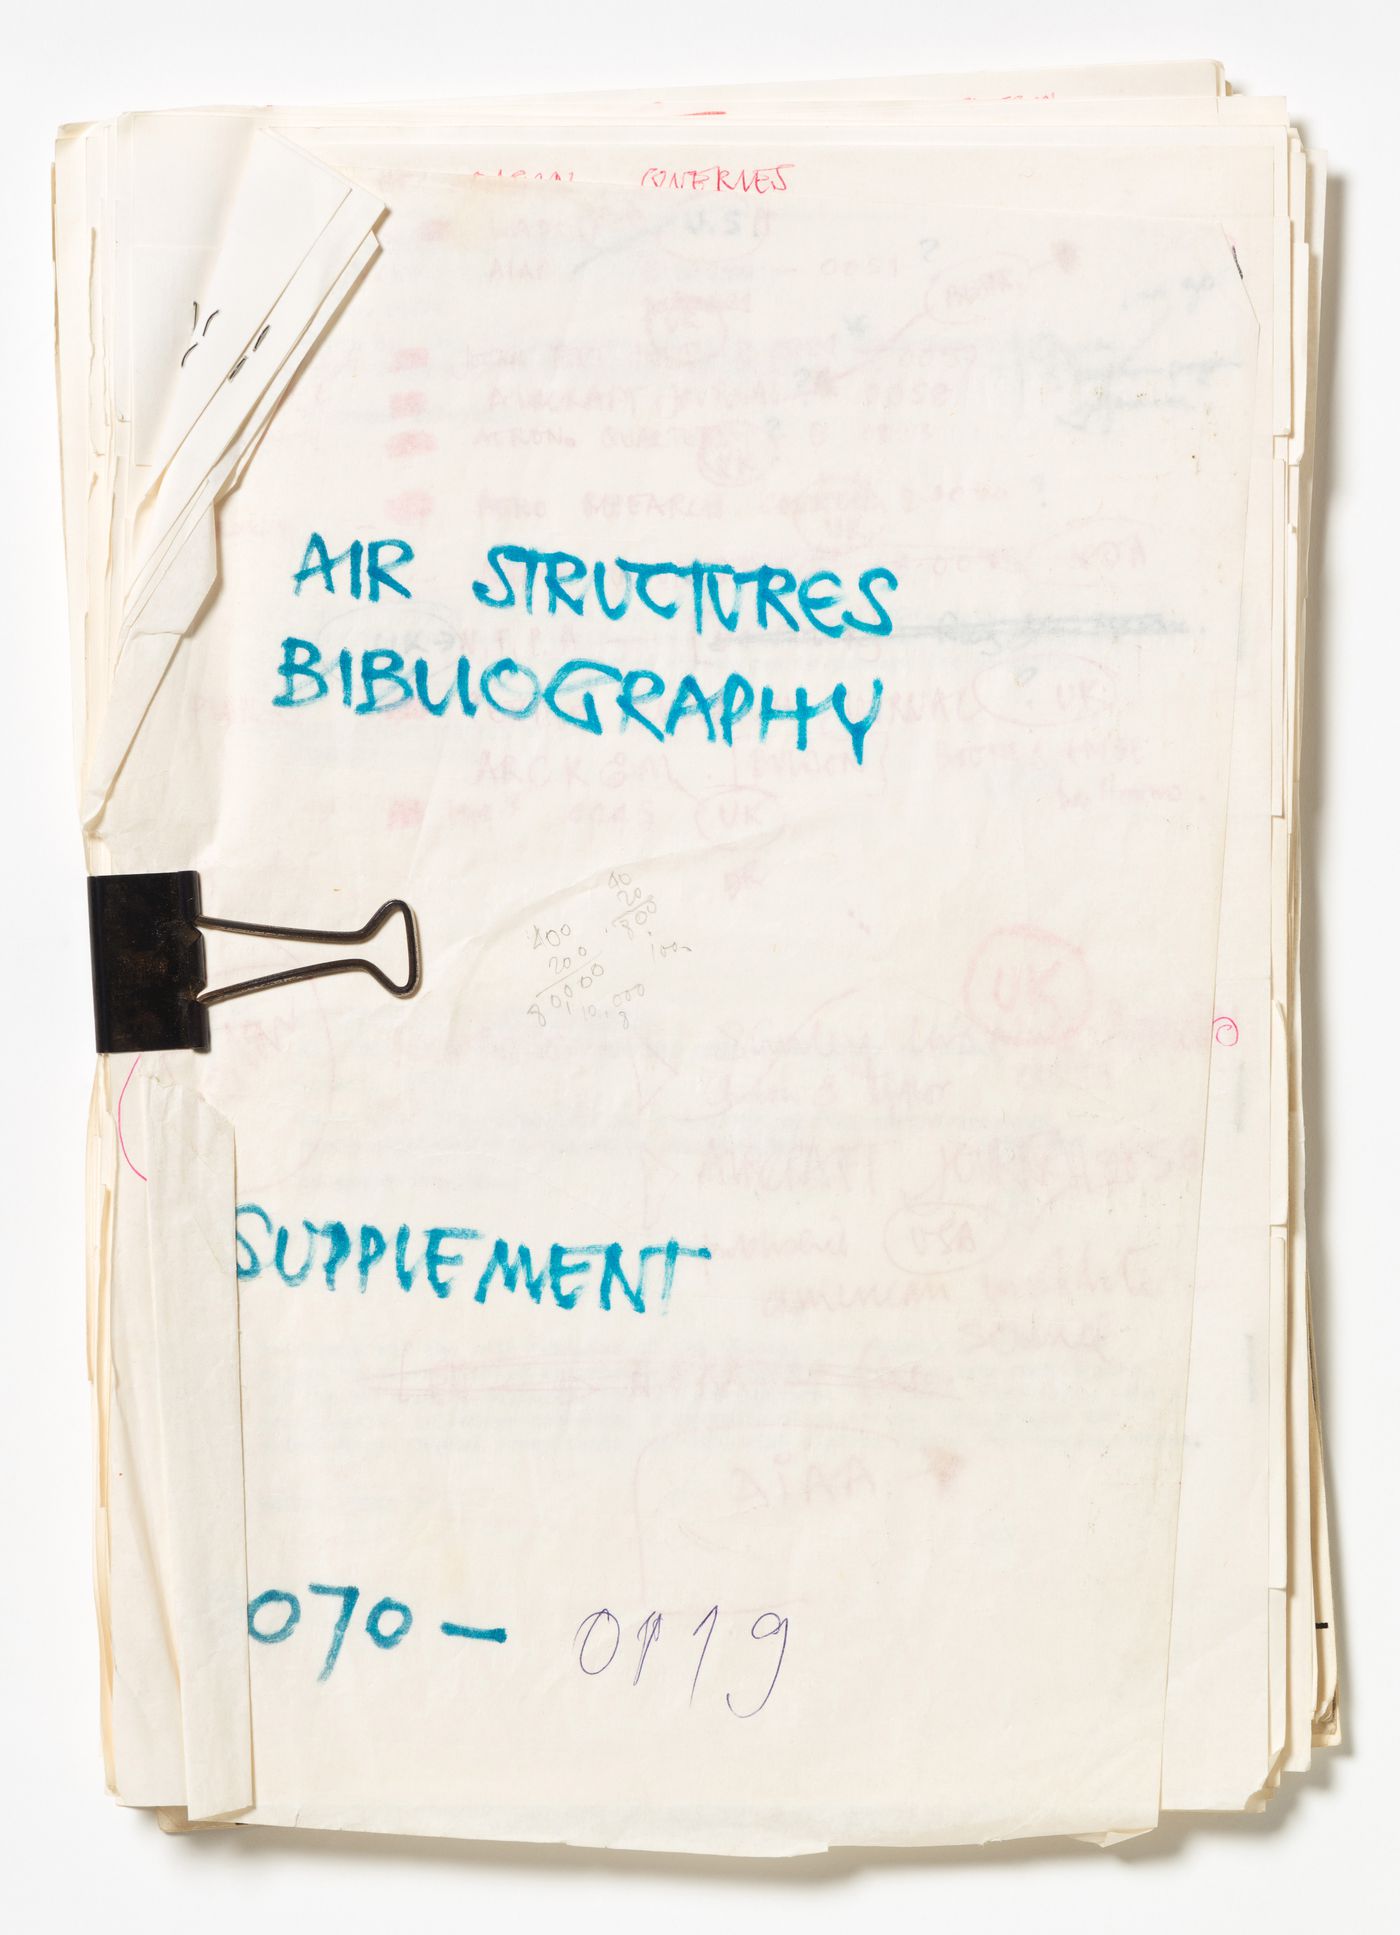 Draft for the first supplement to the Air Structures Bibliography